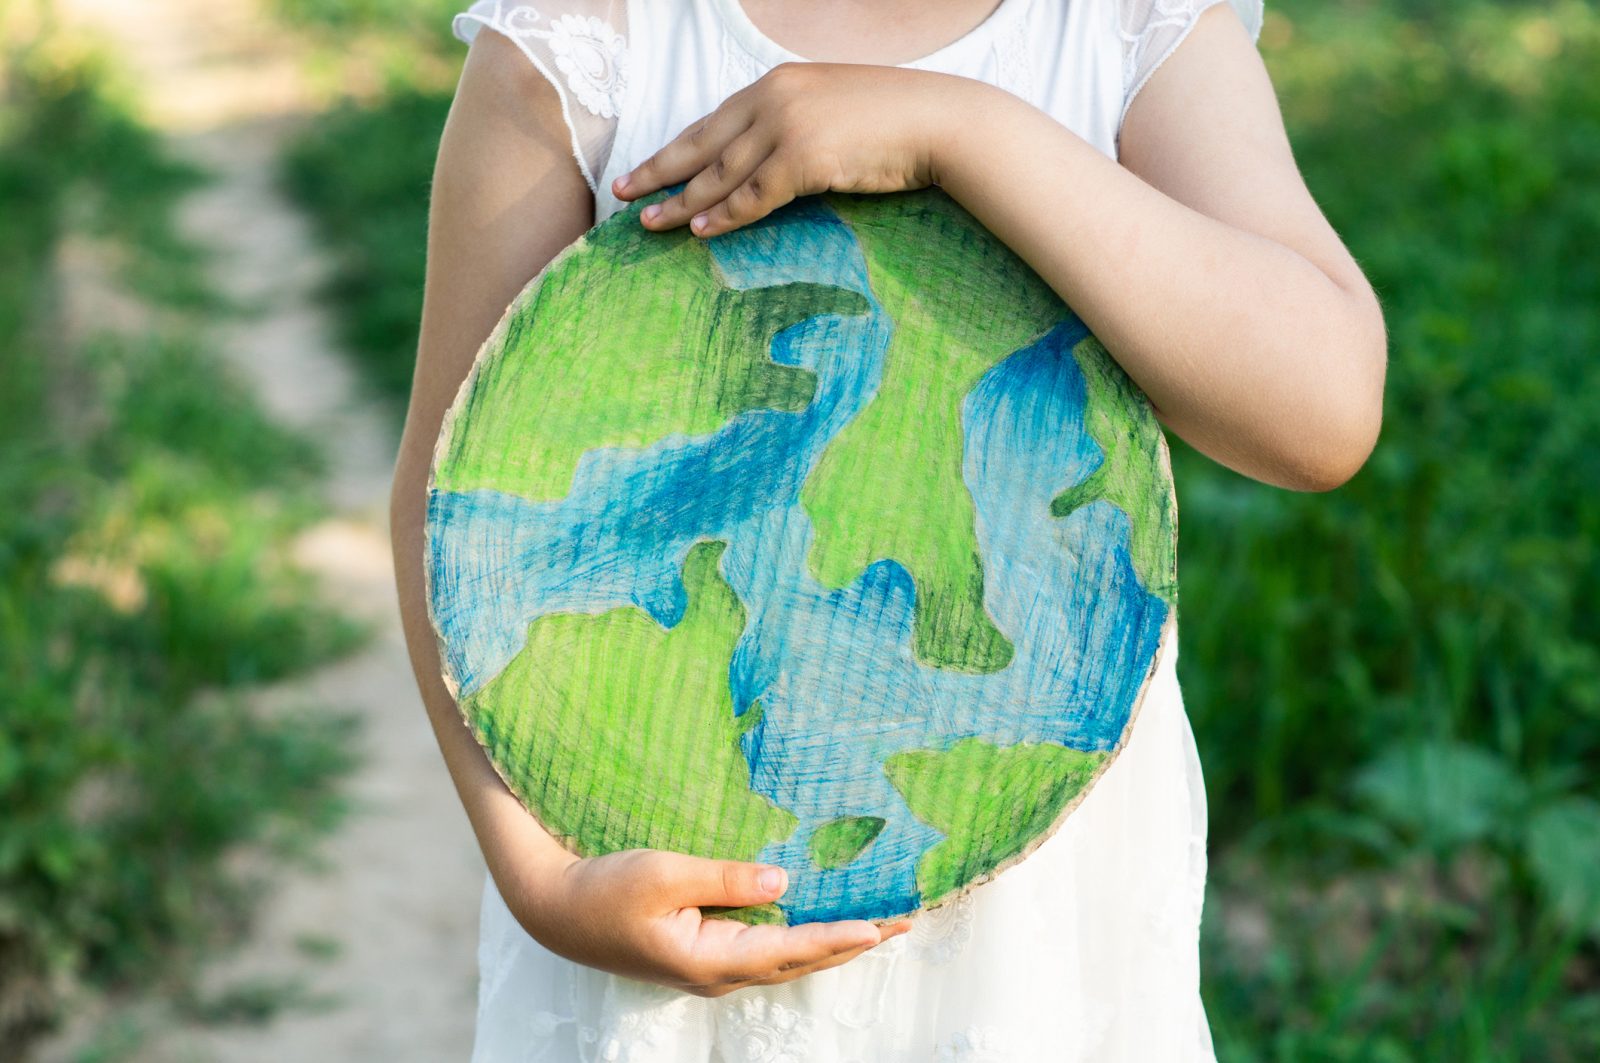 A child standing on an outdoor path and holding a cardboard circle painted to look like Earth.